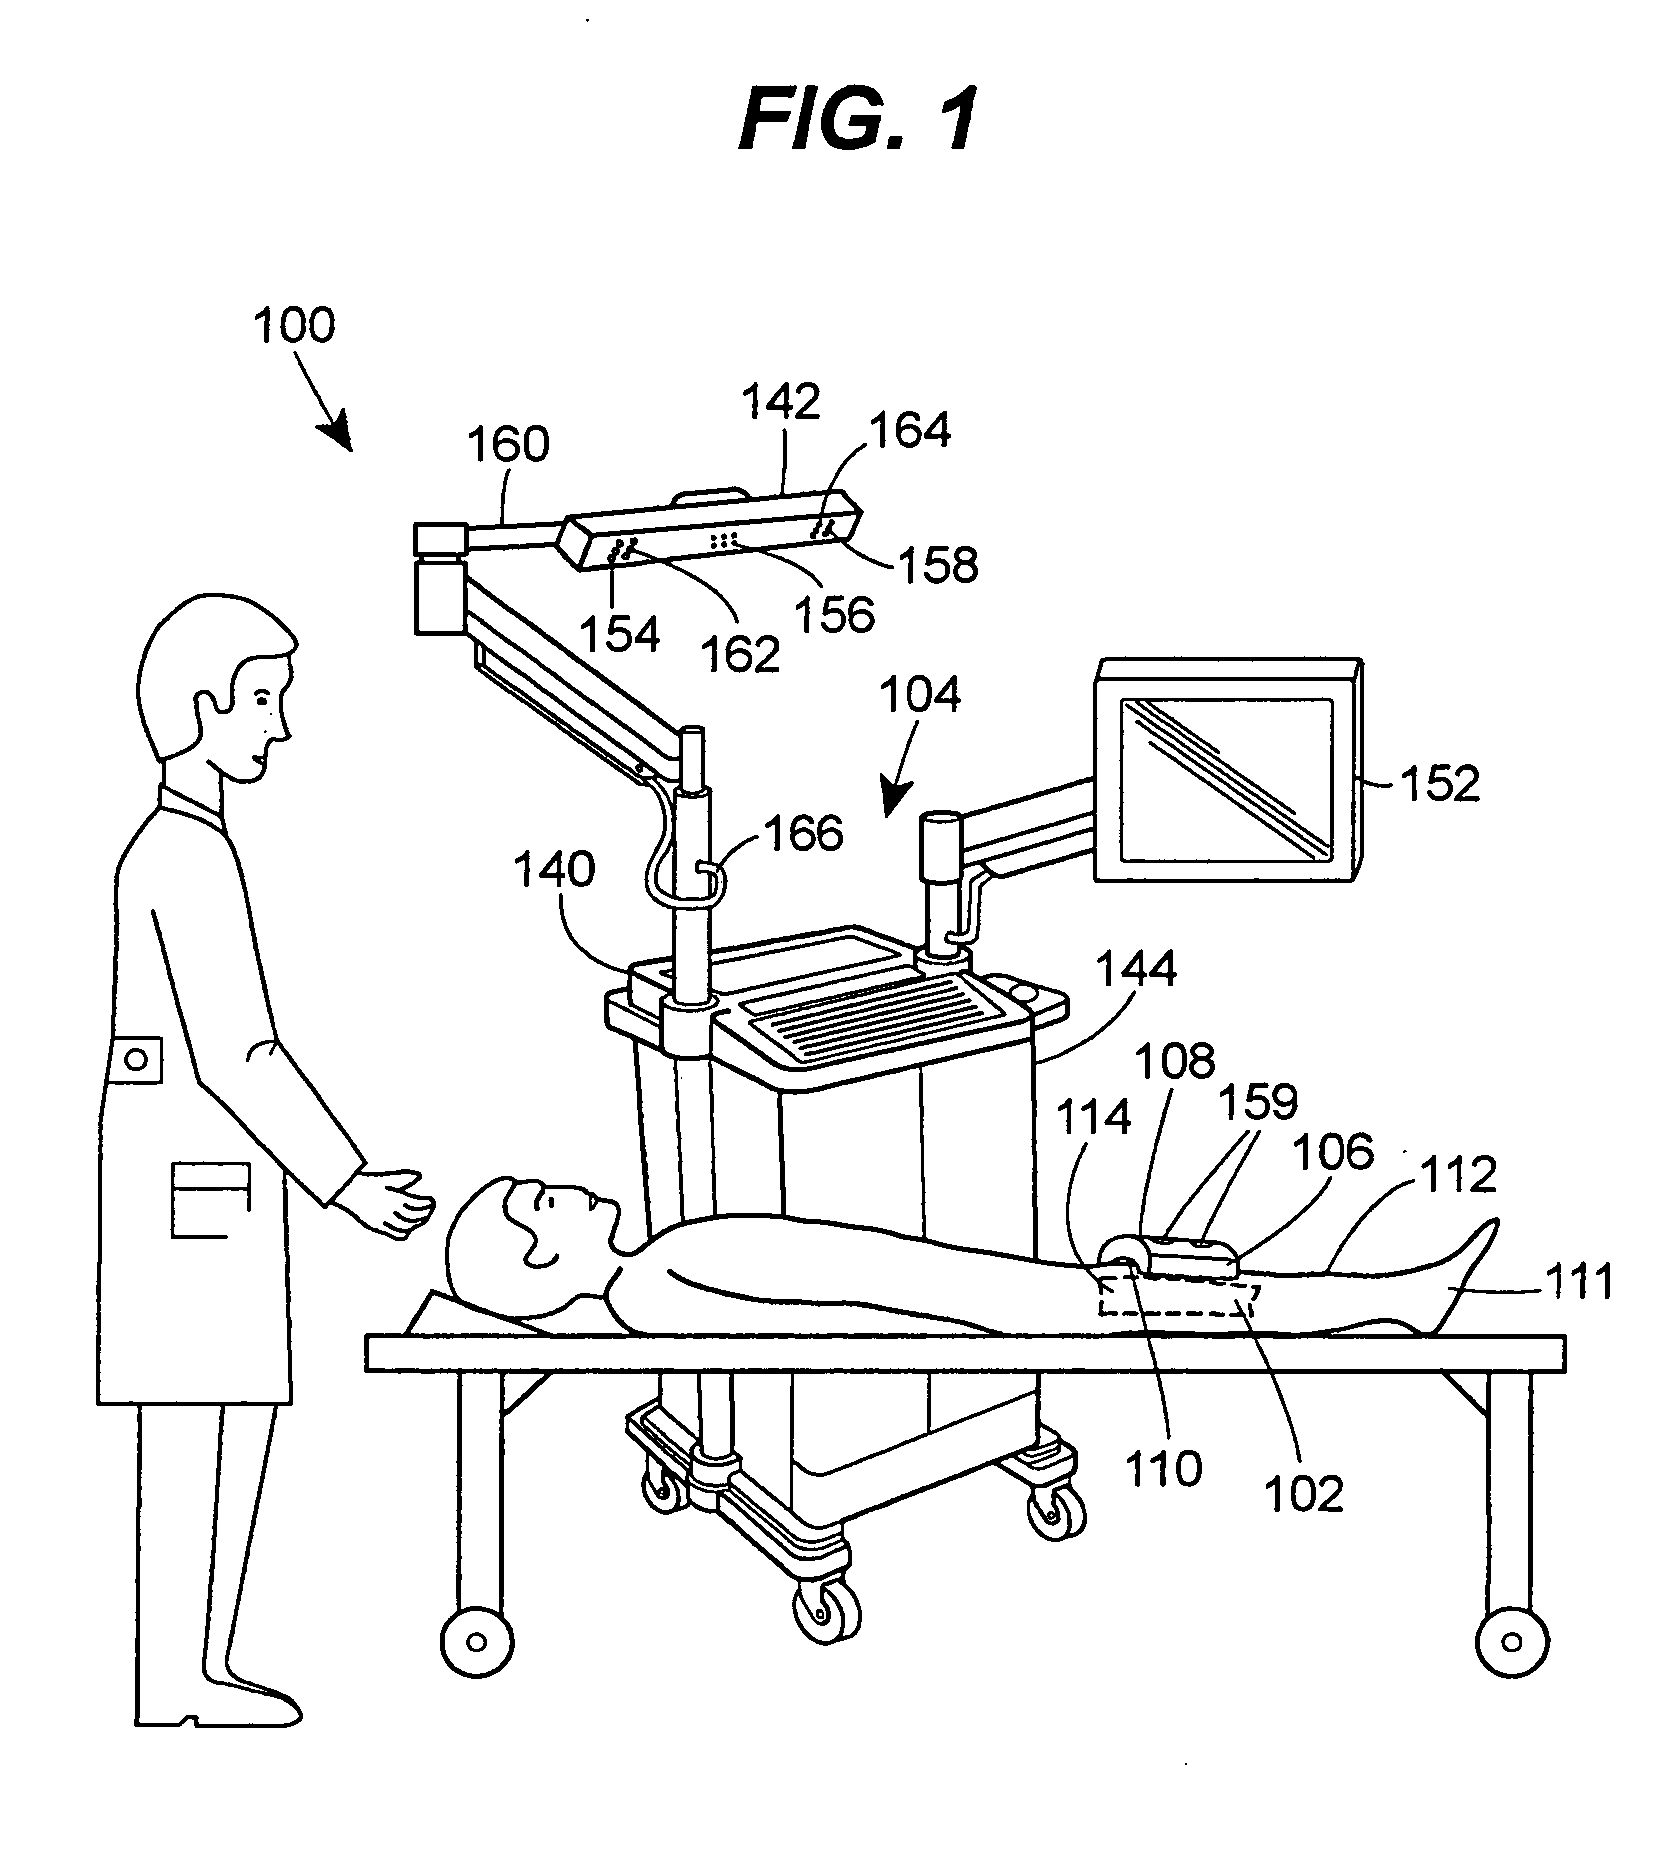 System, device, and method for determining a position of an object